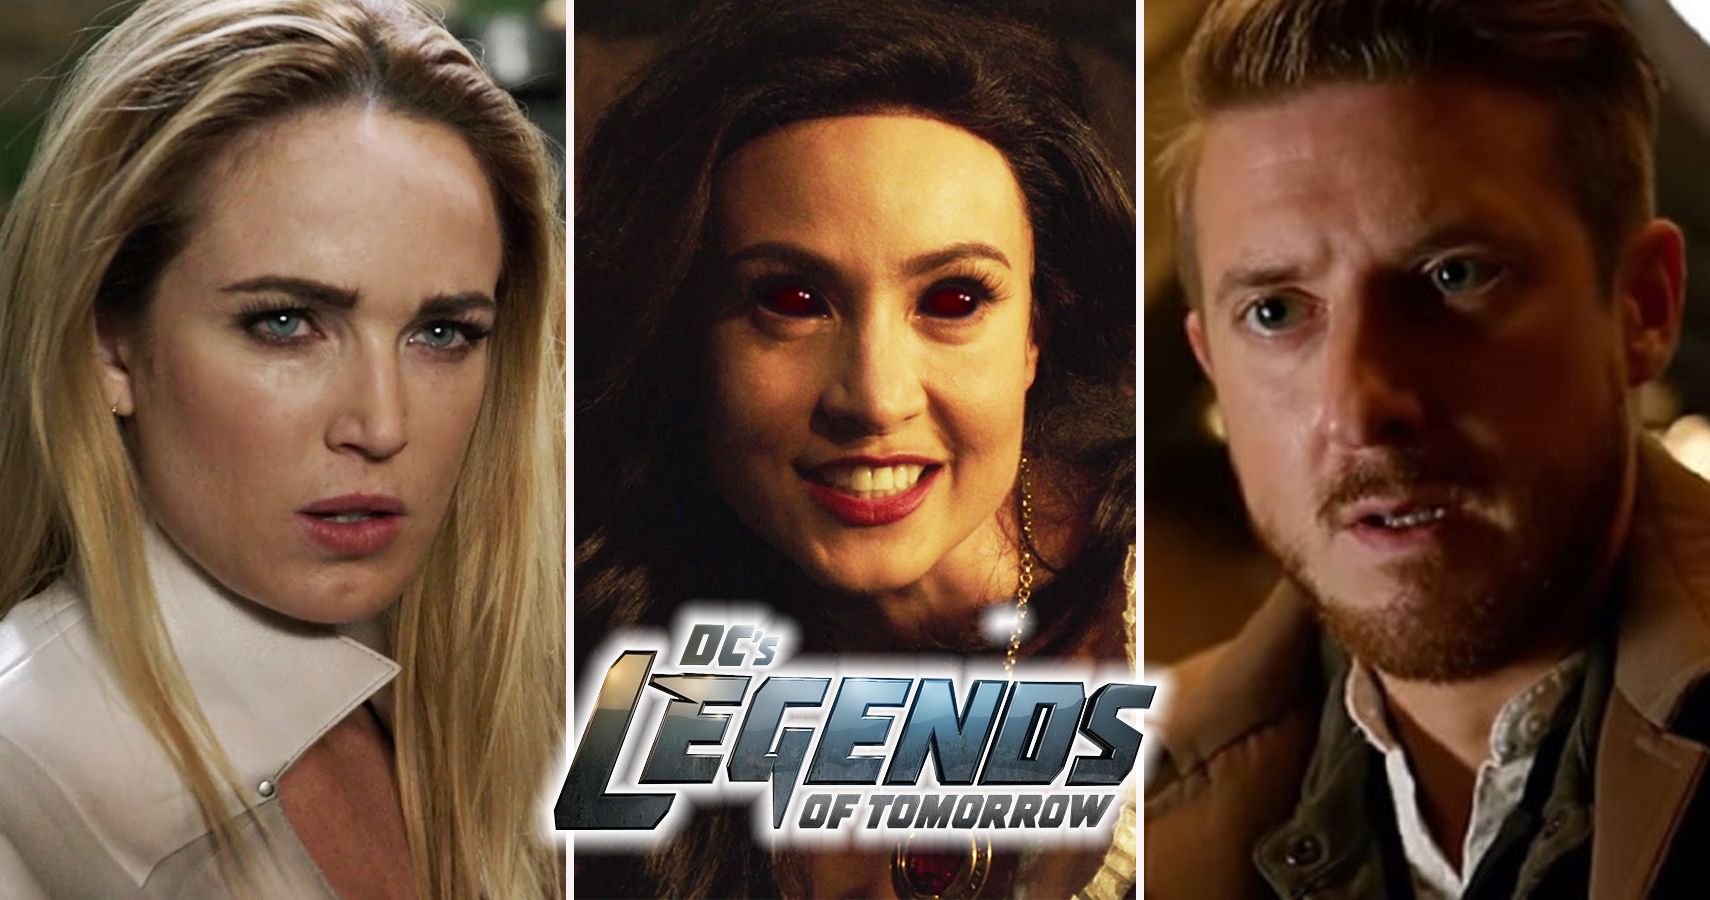 Who are the 'Legends of Tomorrow'? Here's everything you need to know